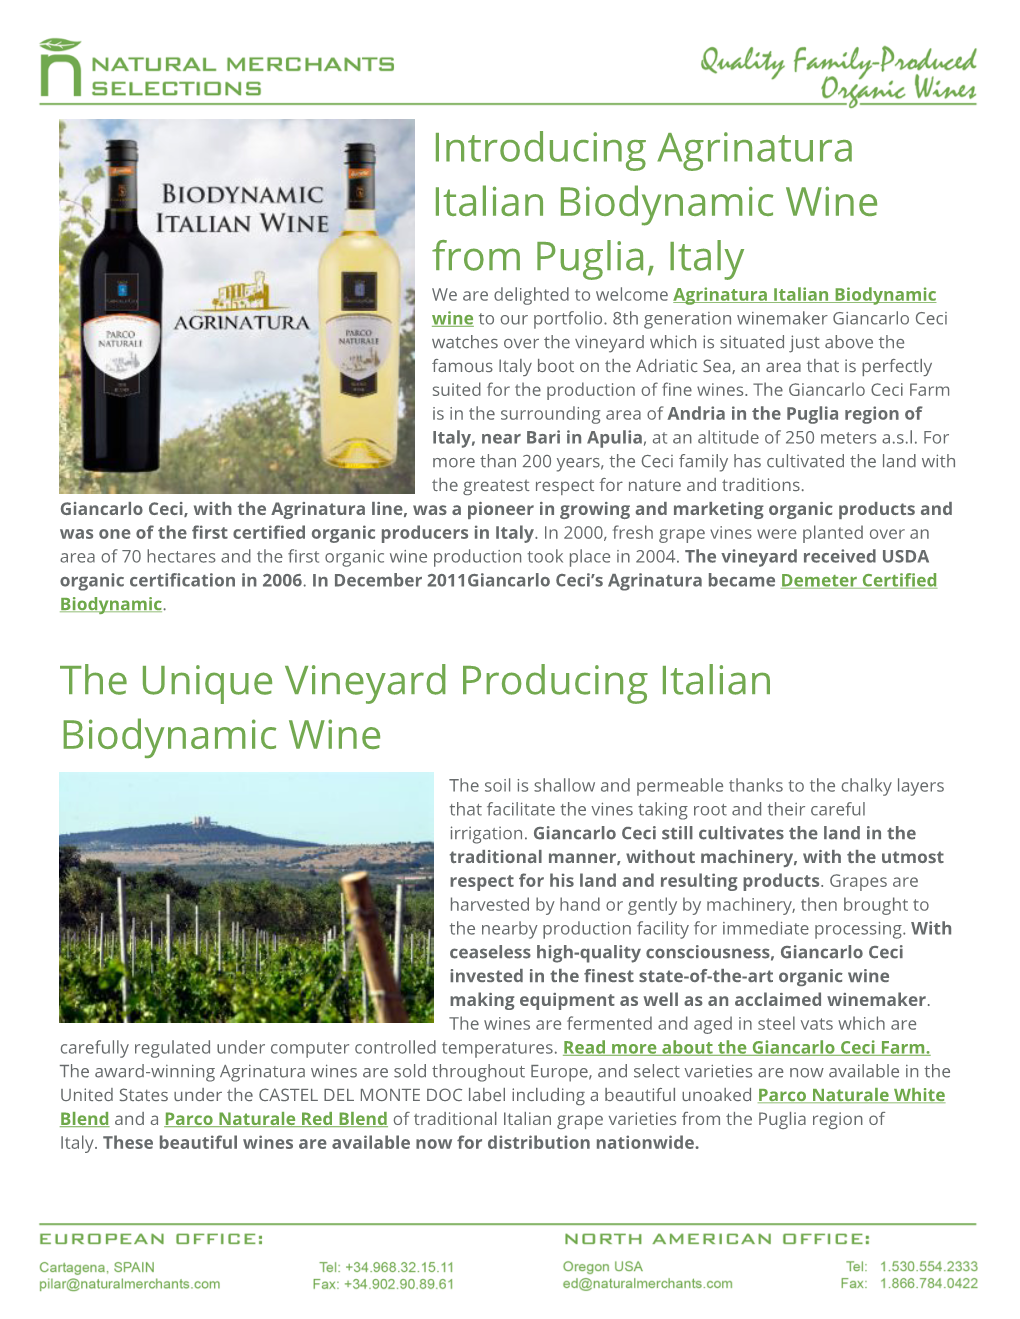 Introducing Agrinatura Italian Biodynamic Wine from Puglia, Italy We Are Delighted to Welcome Agrinatura Italian Biodynamic Wine to Our Portfolio